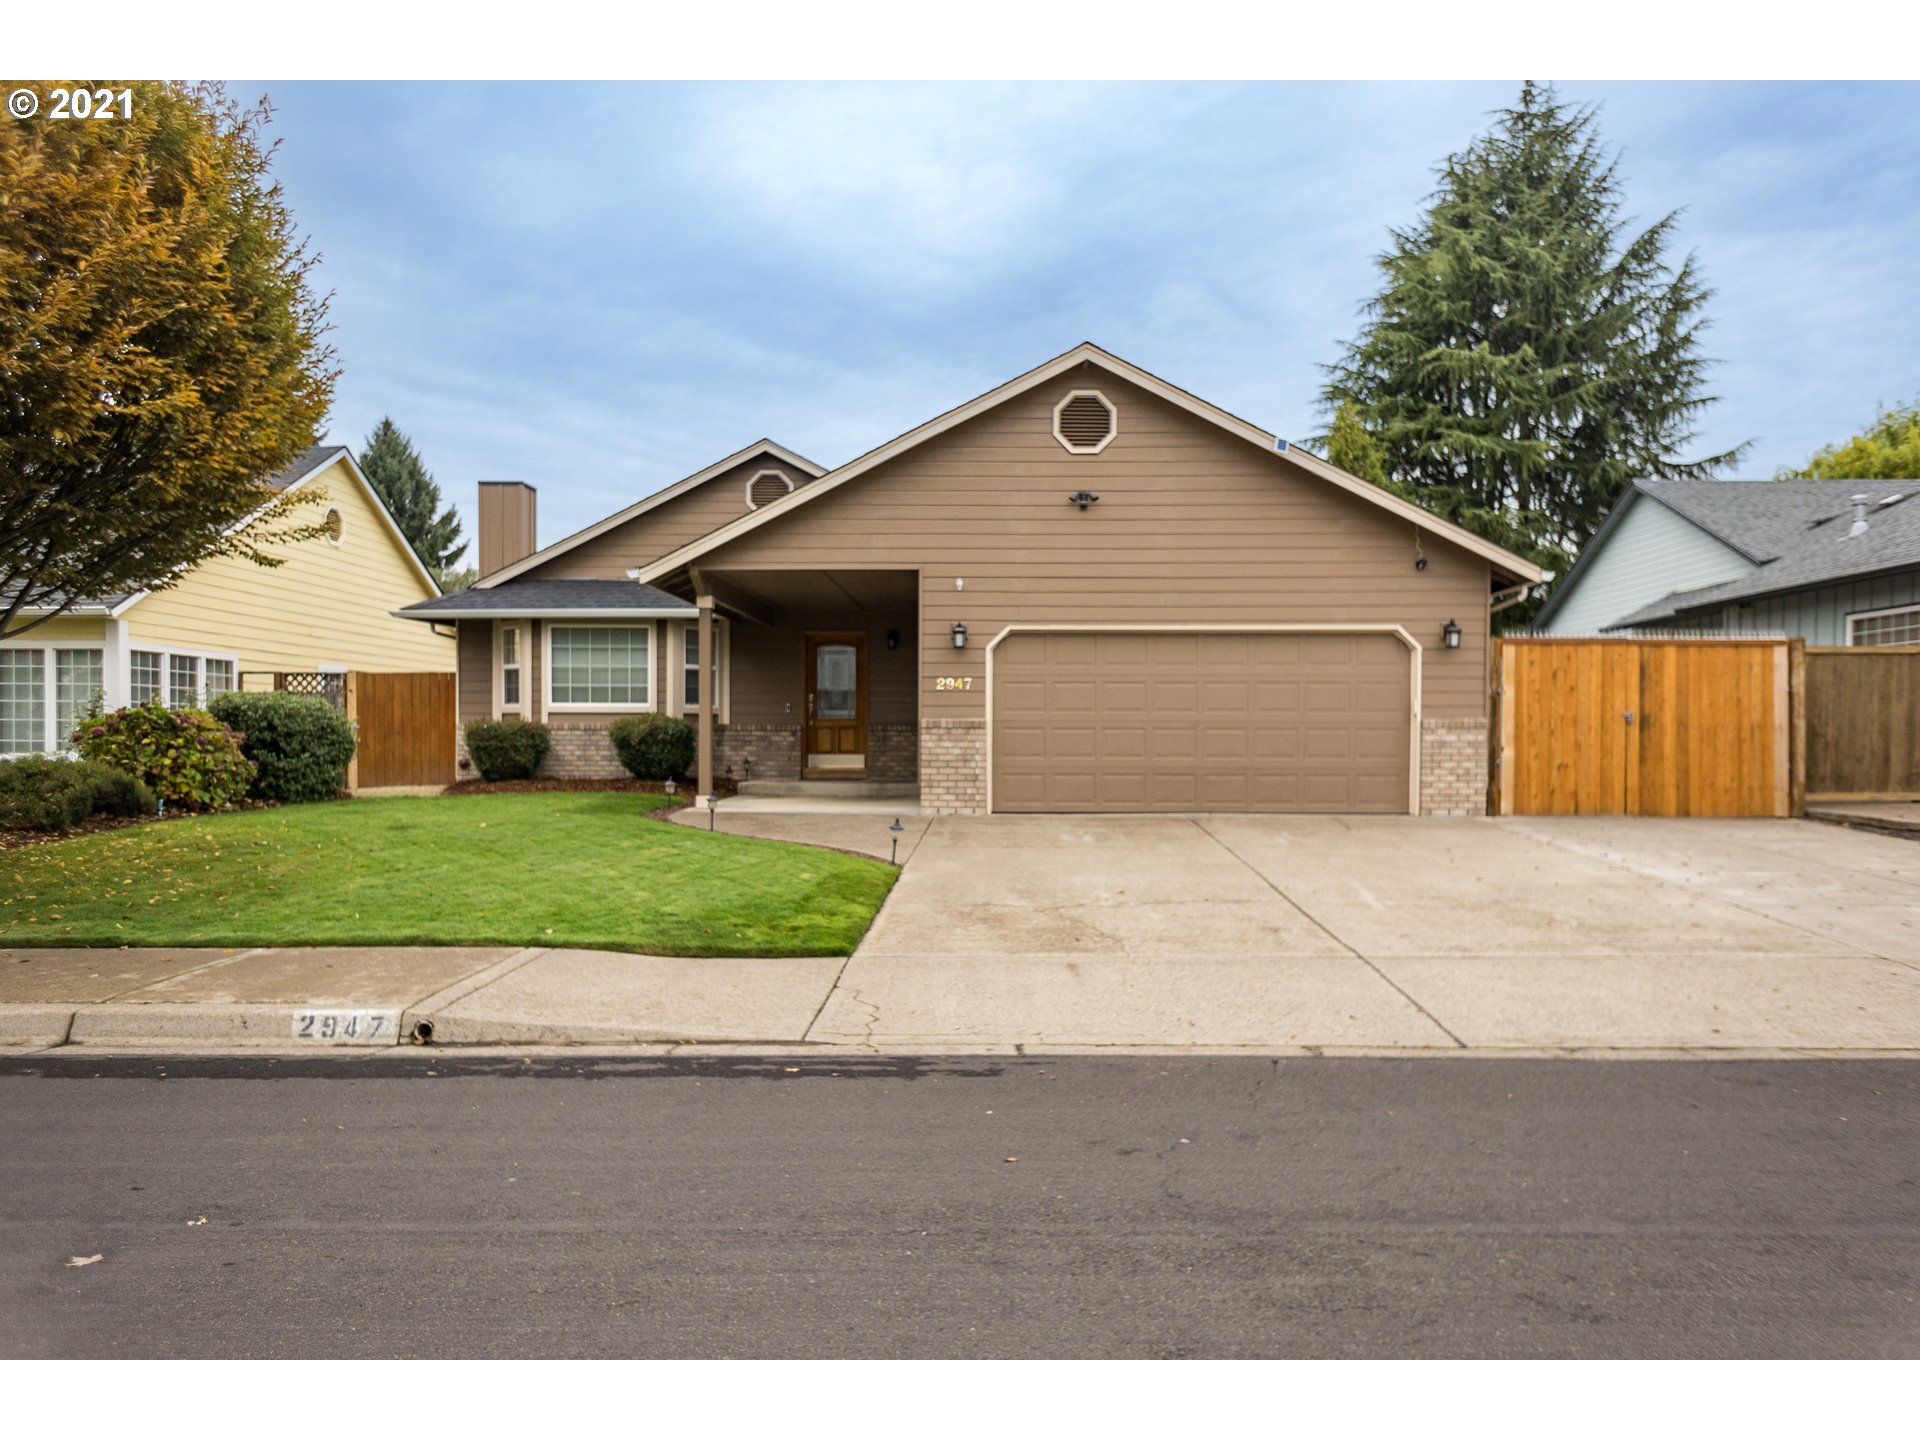 2947 DRY CREEK RD Eugene Home Listings - Galand Haas Real Estate